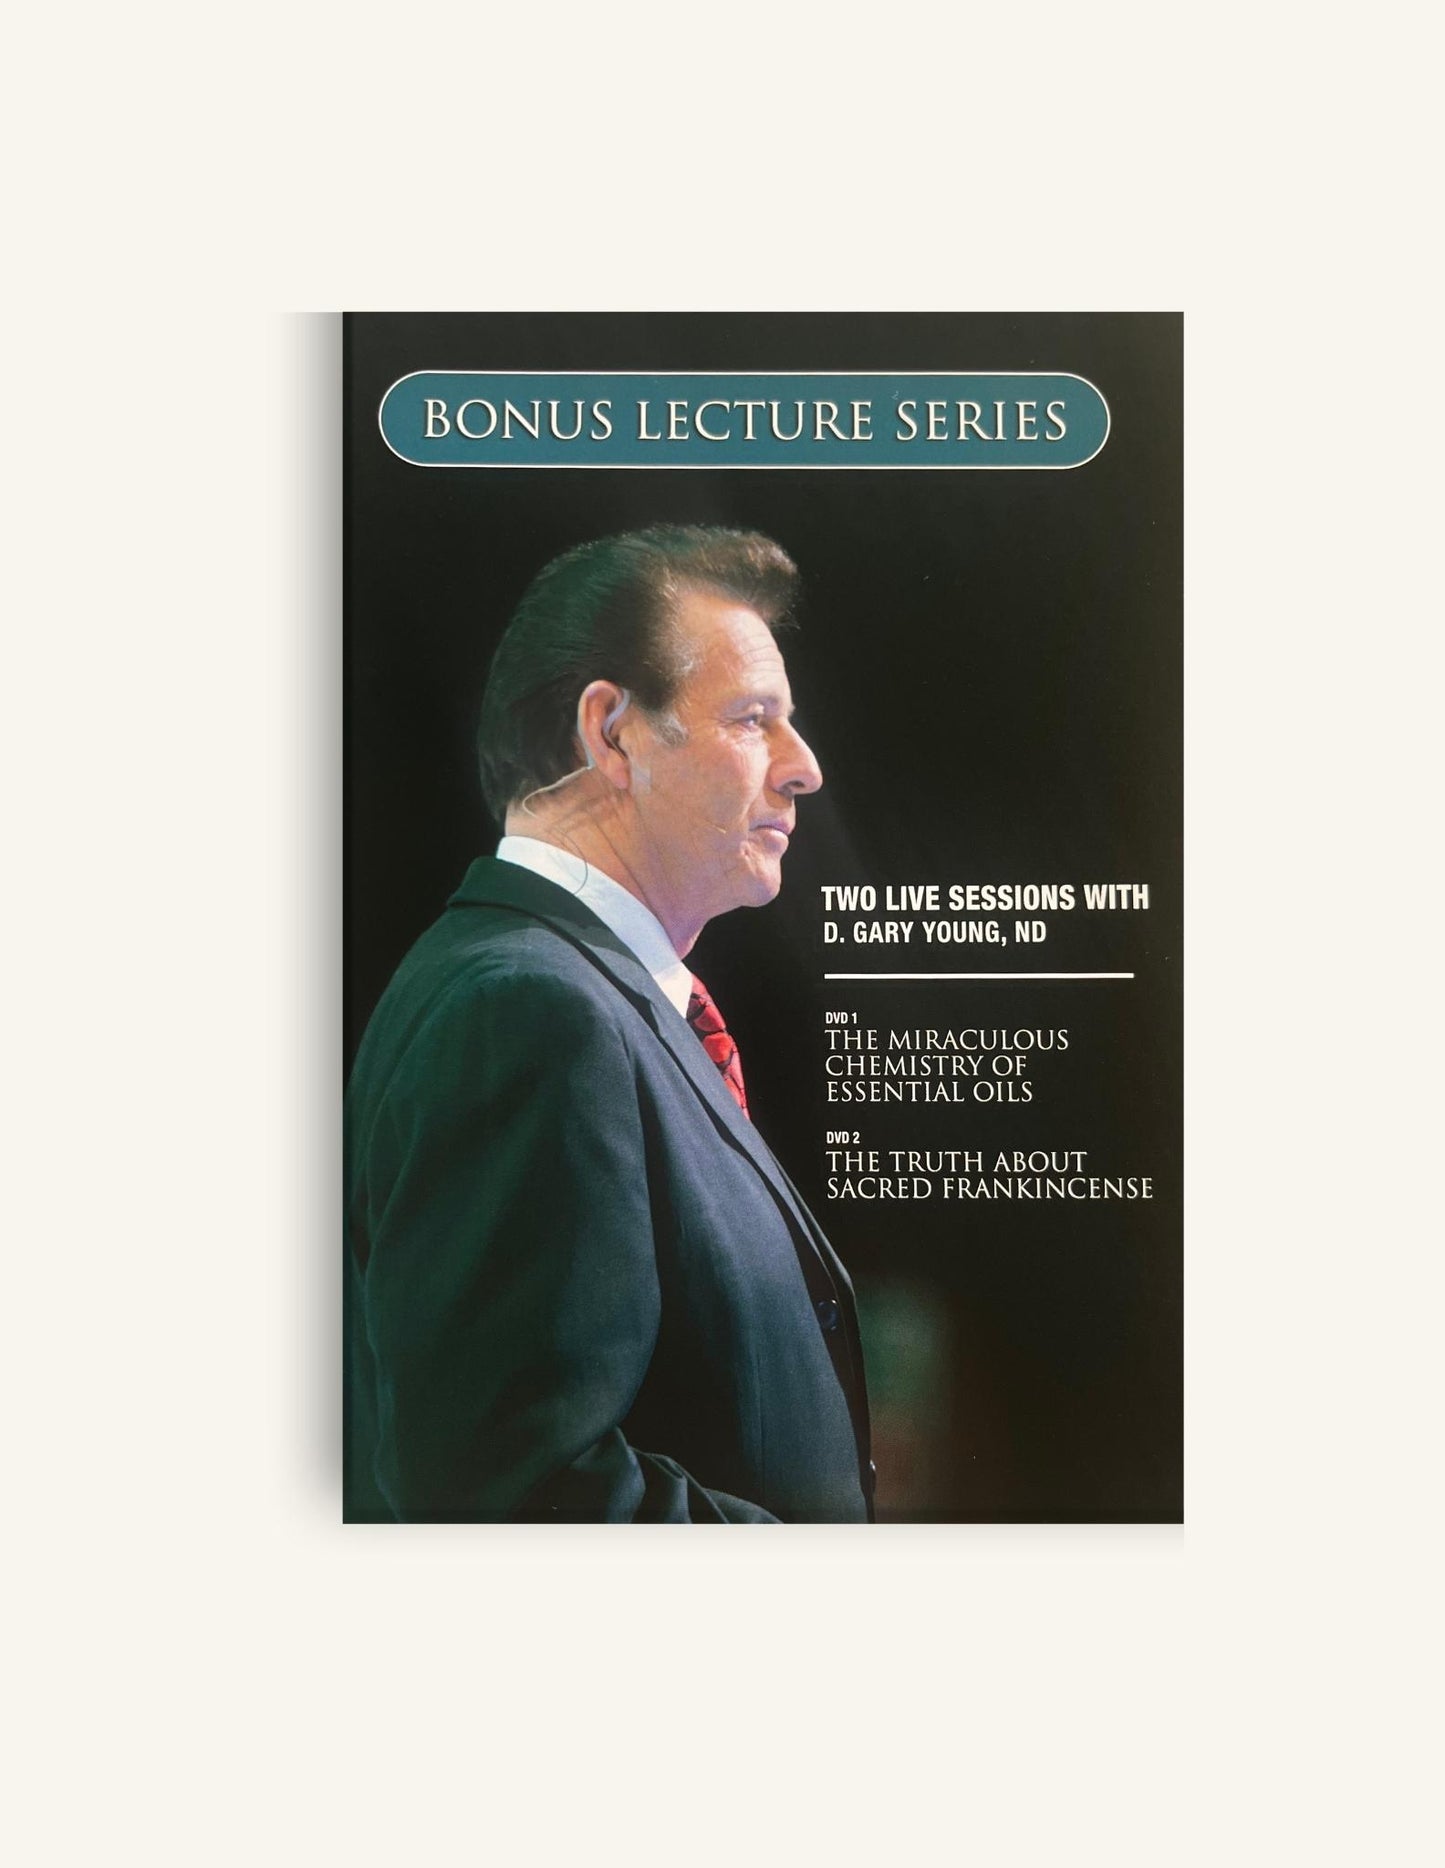 D. Gary Young's Bonus Lecture Series, DVD